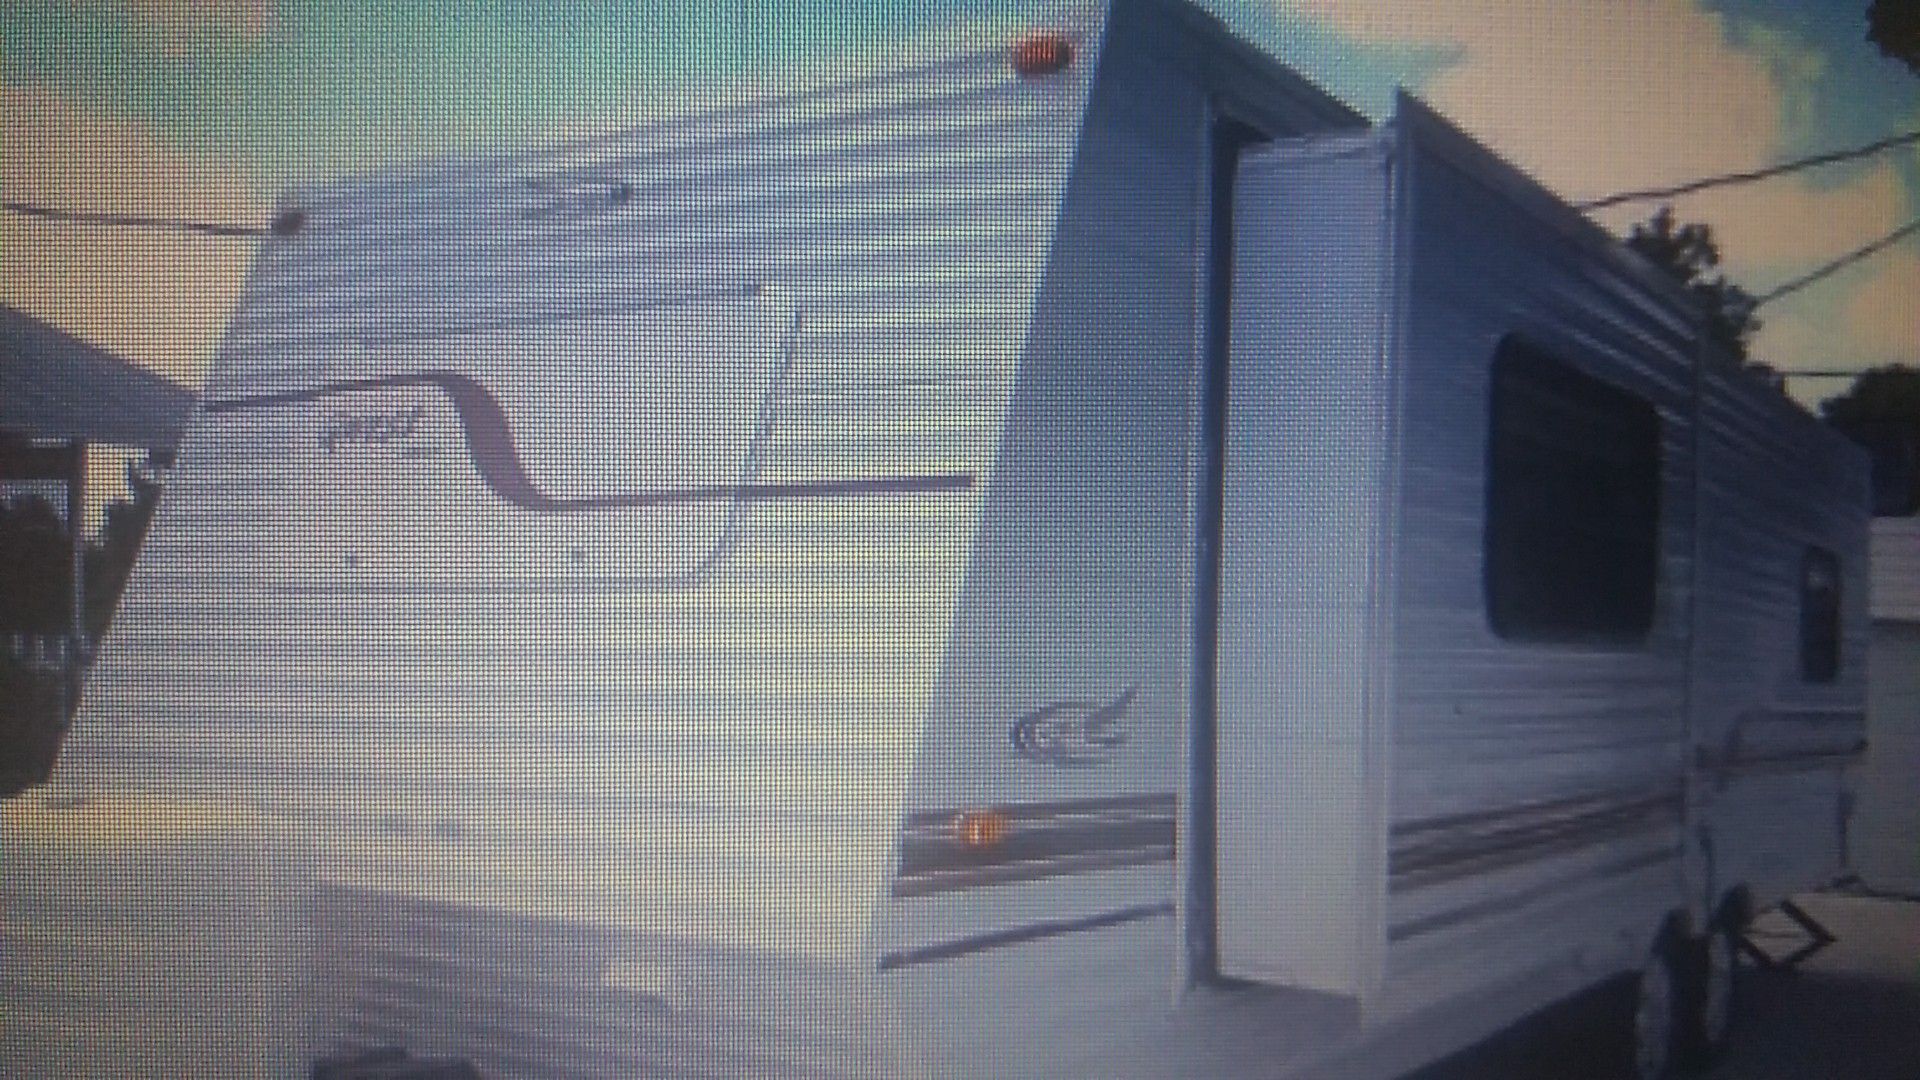 2OOO Jayco Quest 28ft. Just leave your em•ail in chat so I can send you all the details and pics!